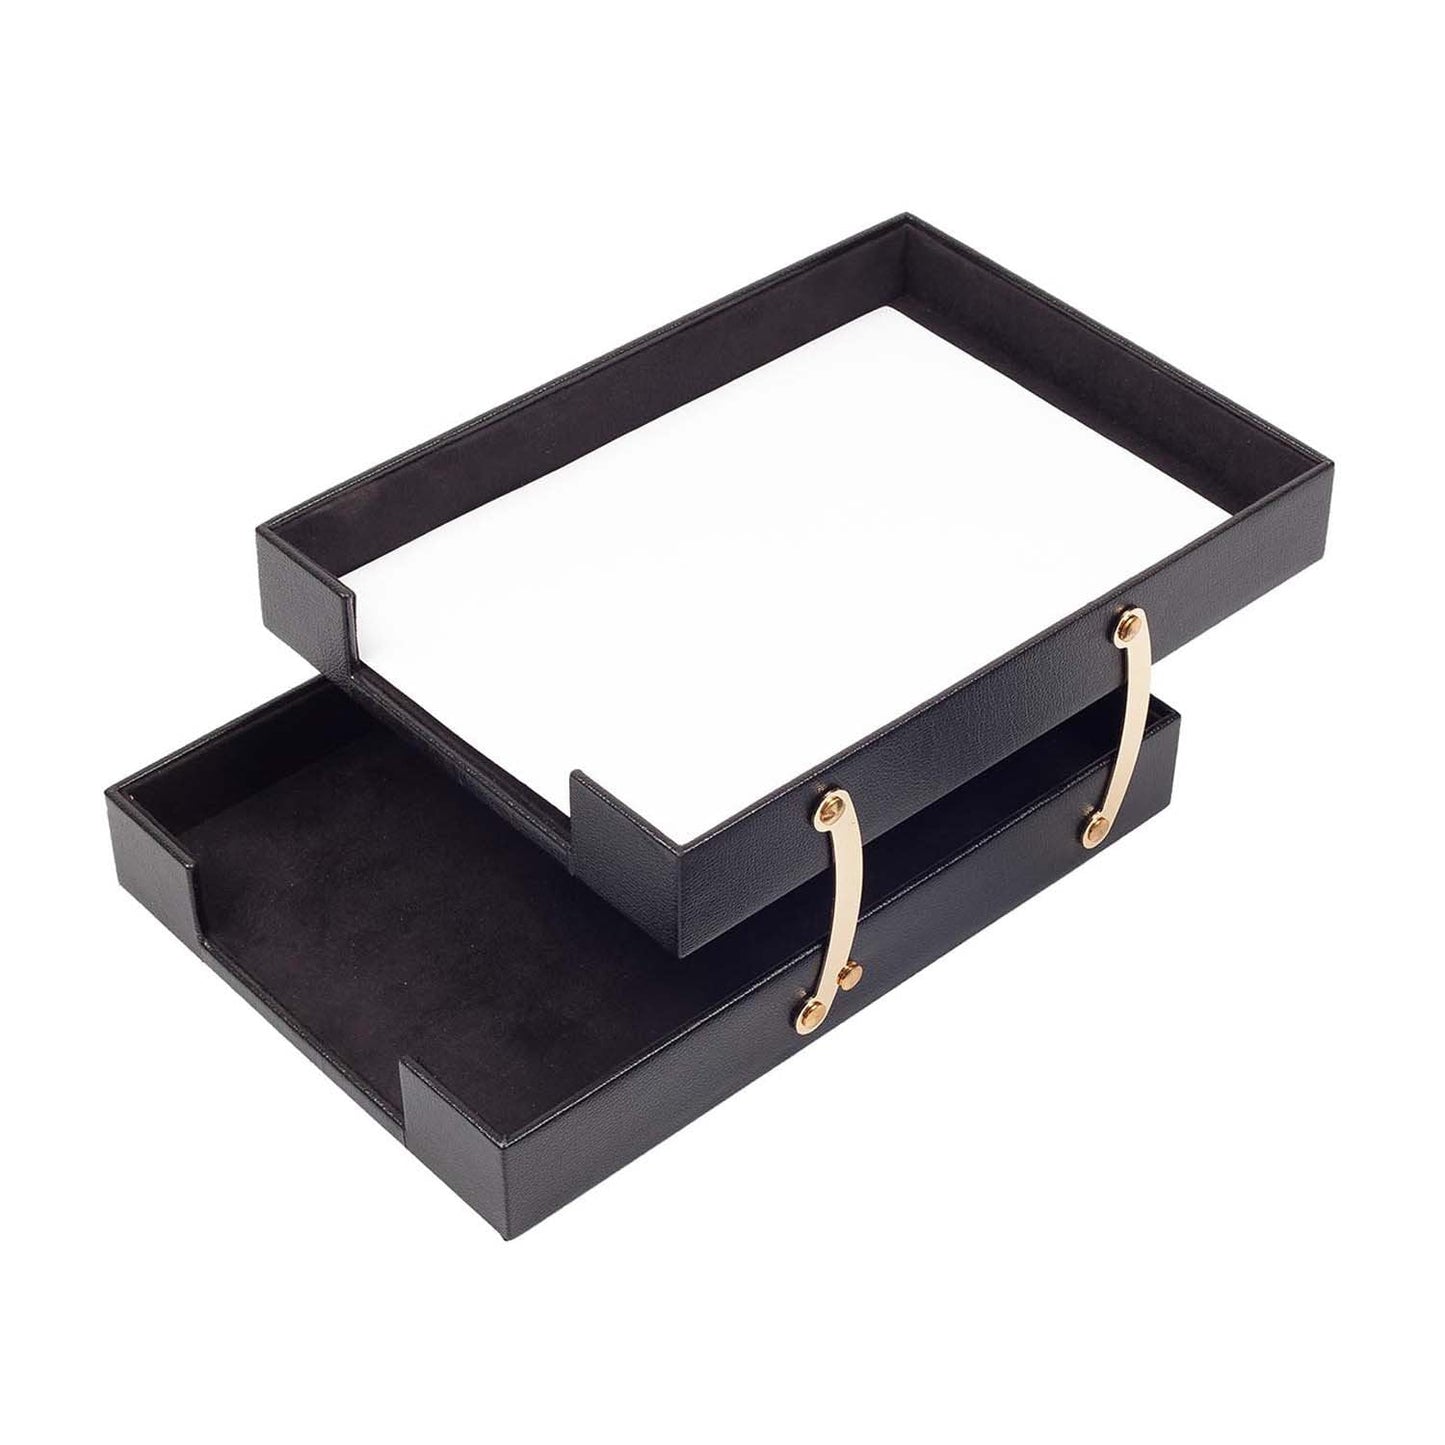 Leather Document Tray Double-Desk Organizer-Office Accessories-Desk Accessories-Office Supplies-Office Organiz